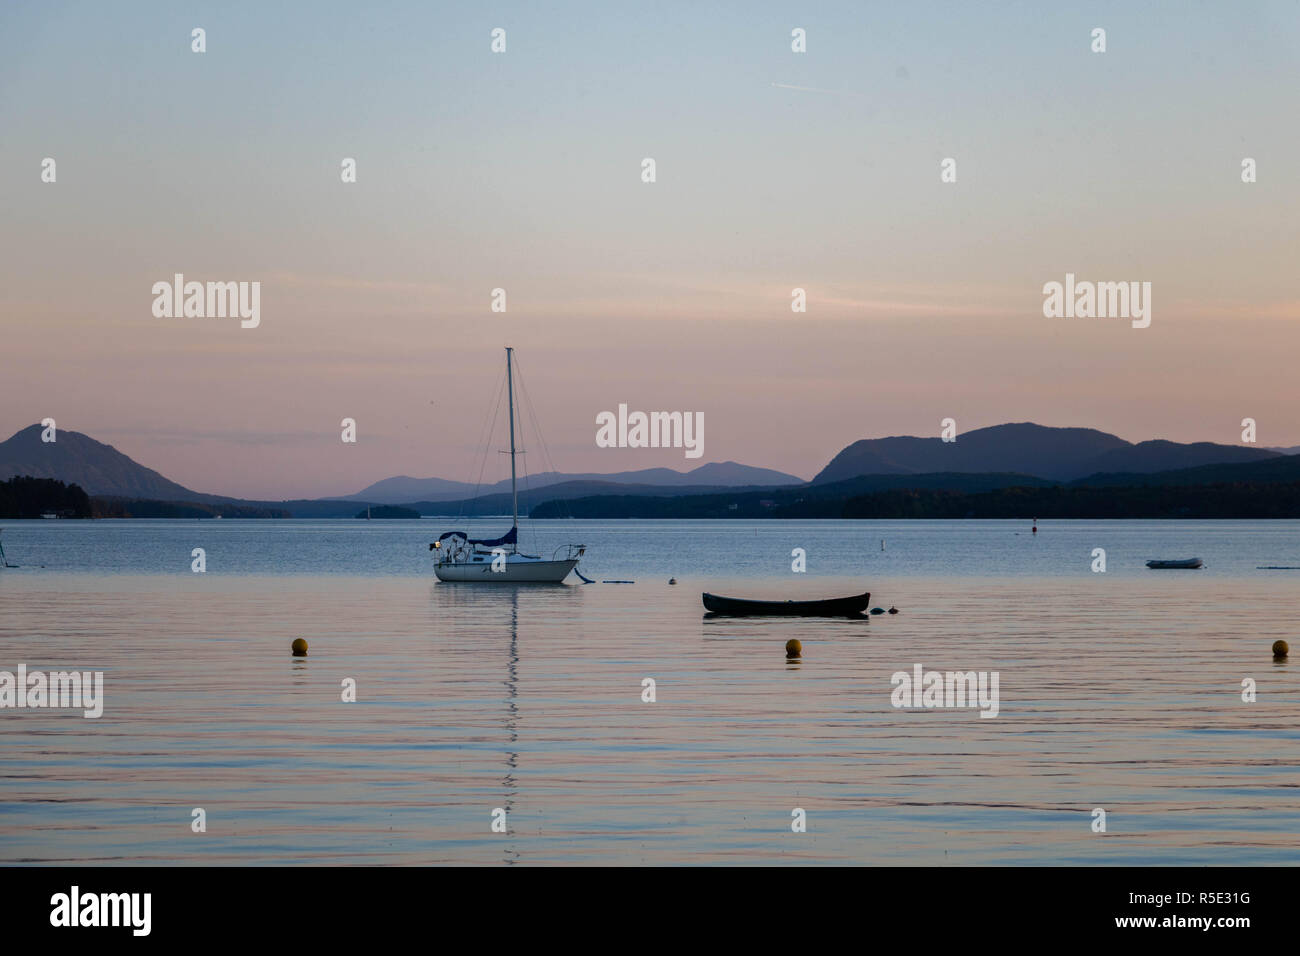 Two boats at the Magog Lake at sunset. The town of Magog, Quebec, Canada. Stock Photo